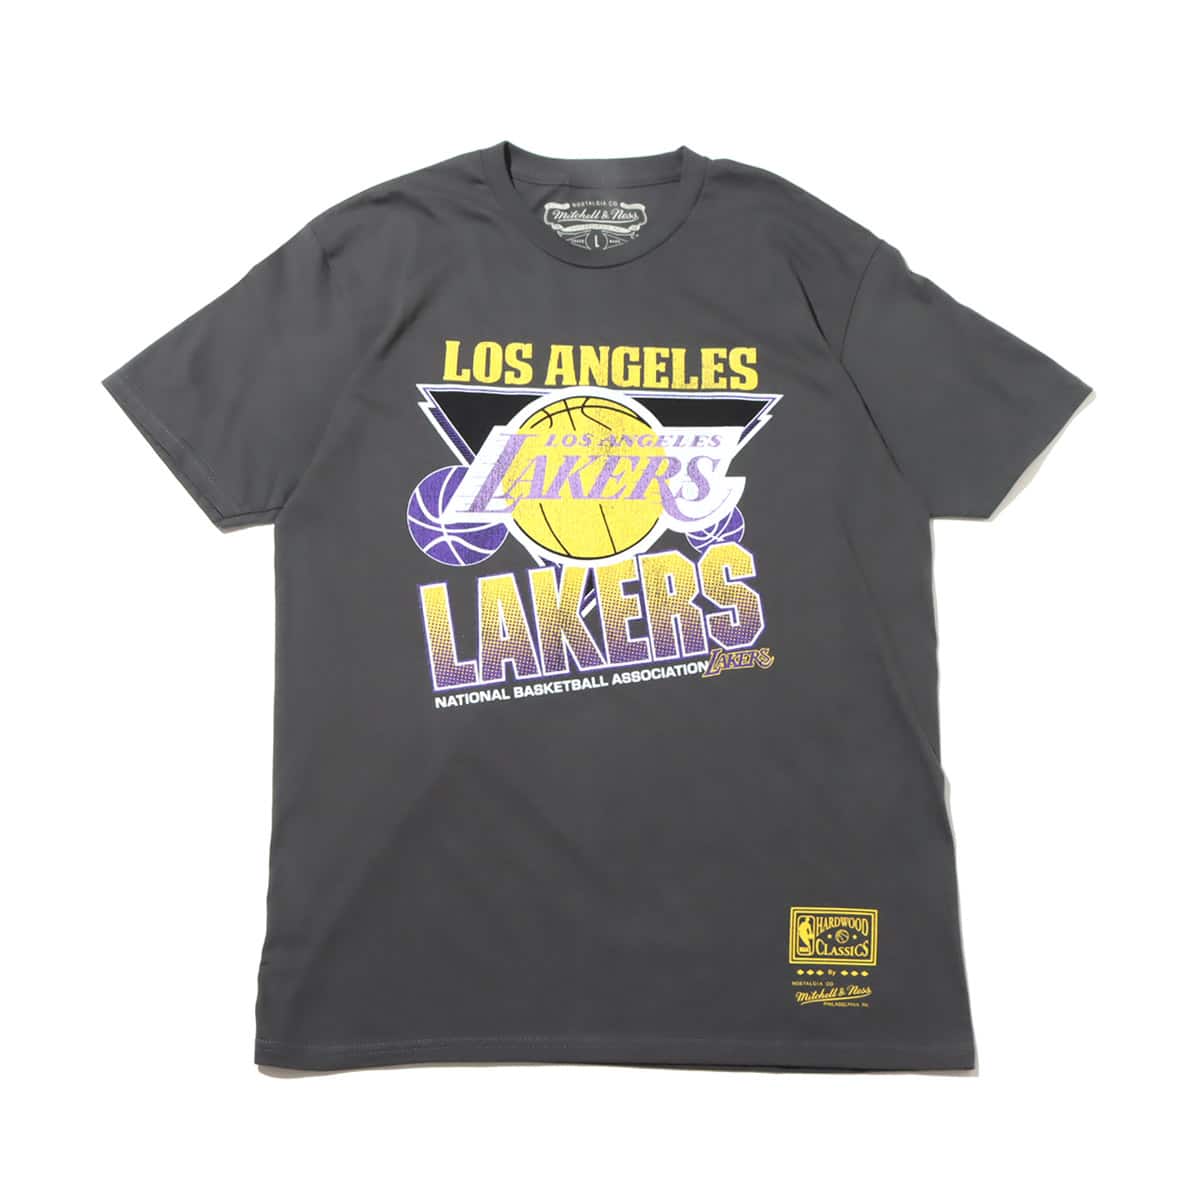 Mitchell & Ness NBA VINTAGE CRACKED TEE LAKERS BLACK 23SS-I